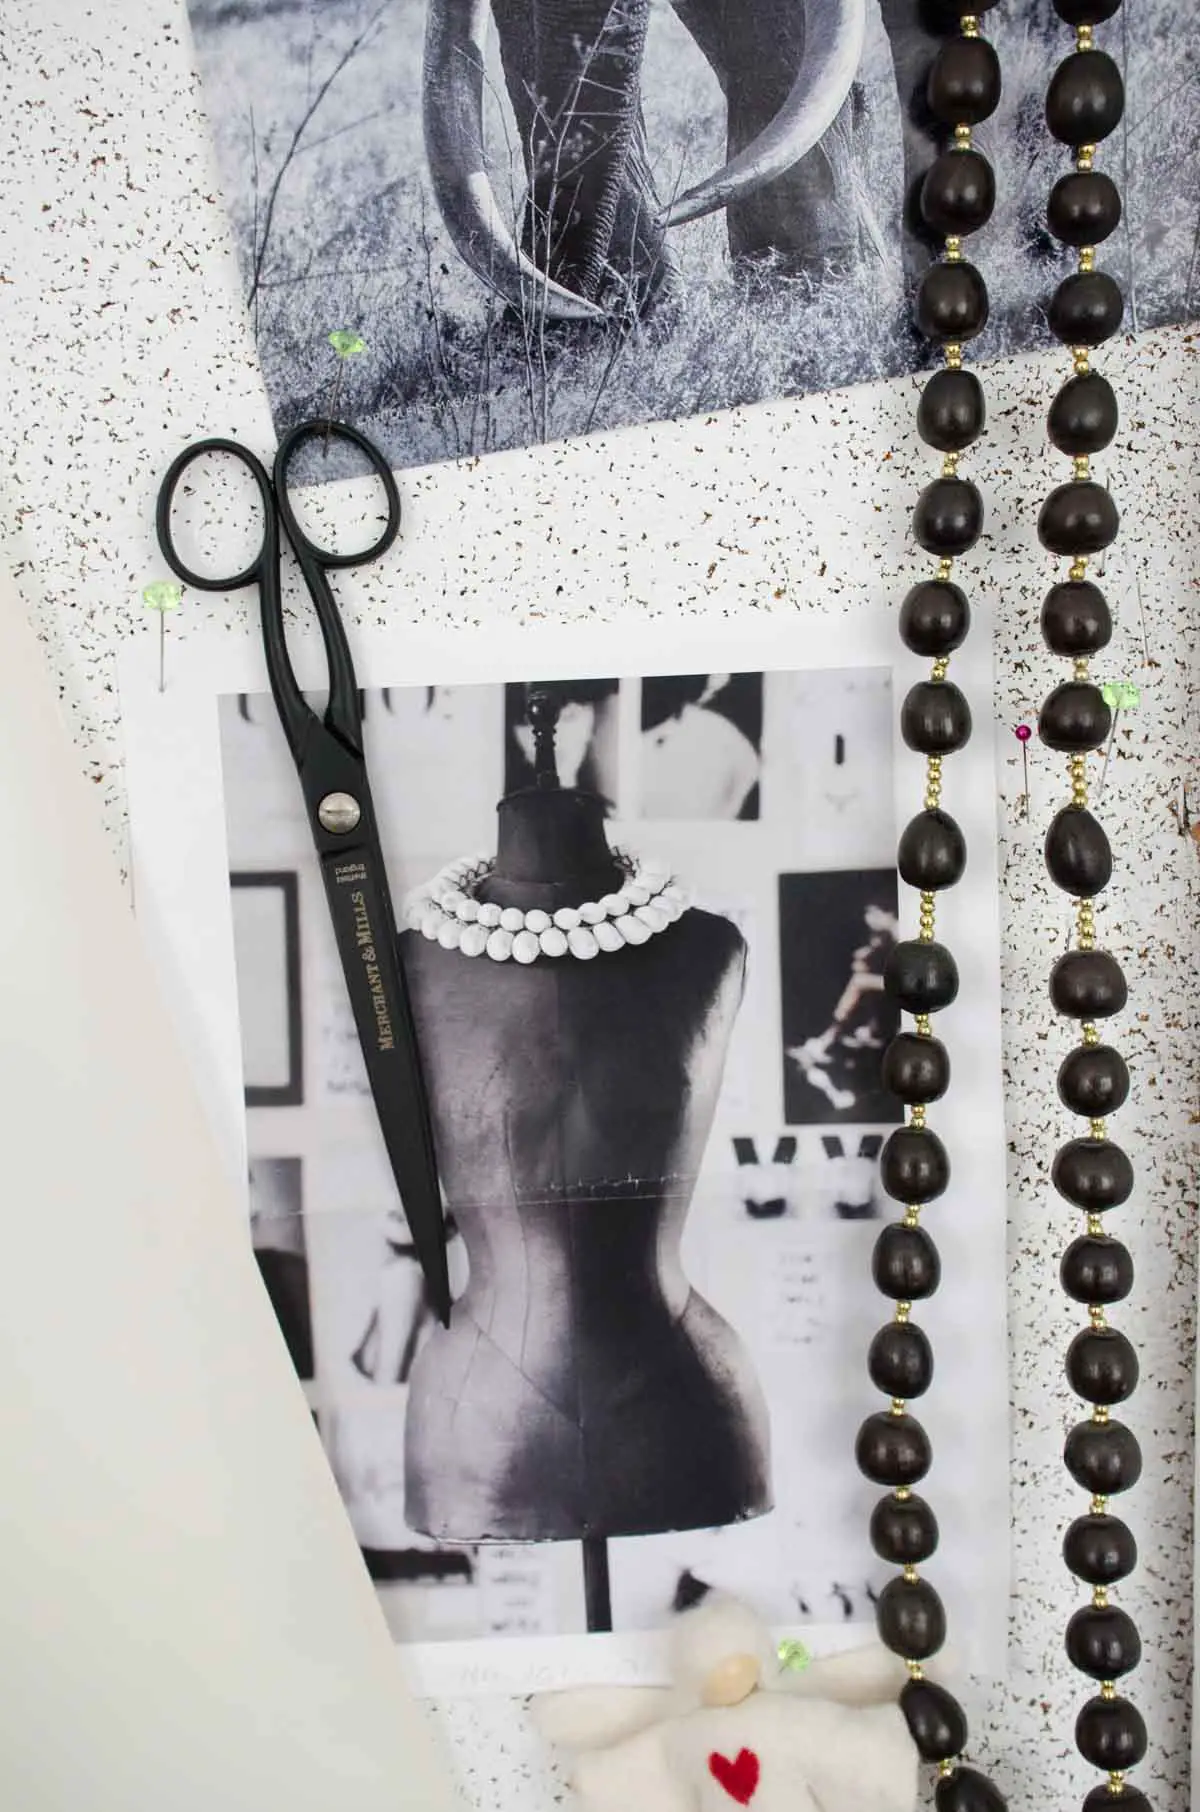 Inspiration board details on @thouswellblog